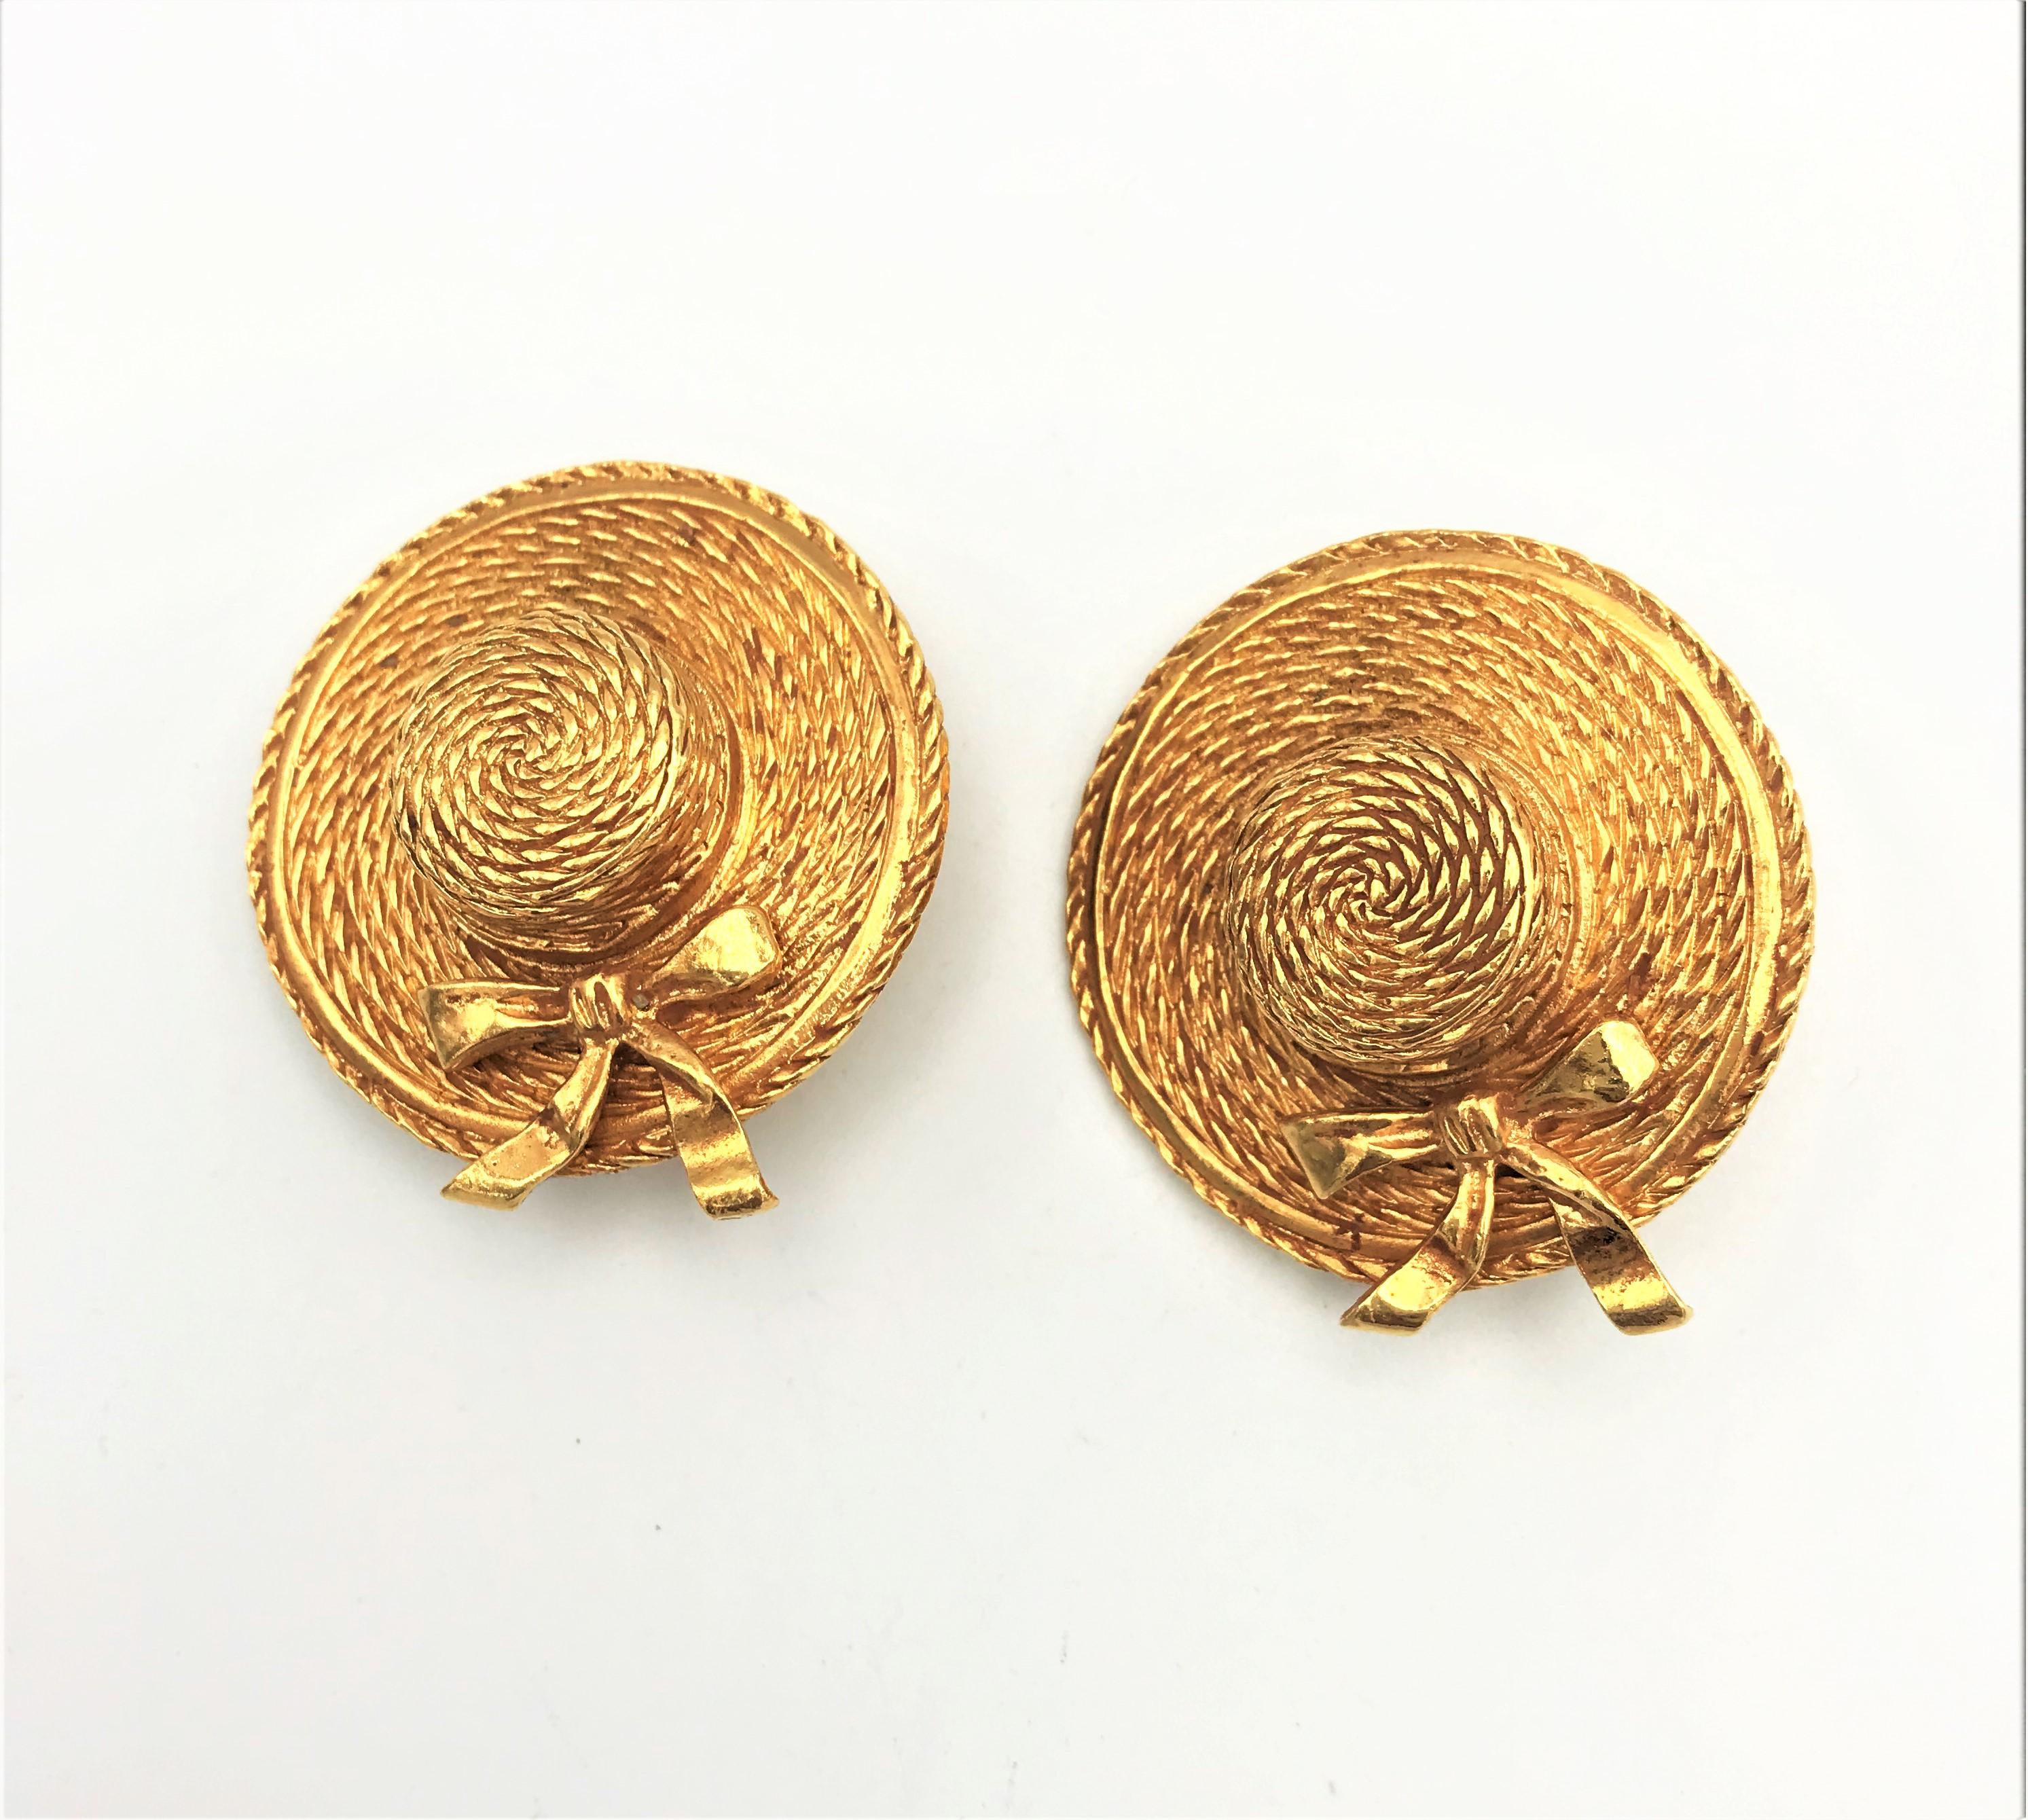 Chanel Clip-on Earrings in the shape of a hat, signed 1970/80s gold plated  For Sale 1